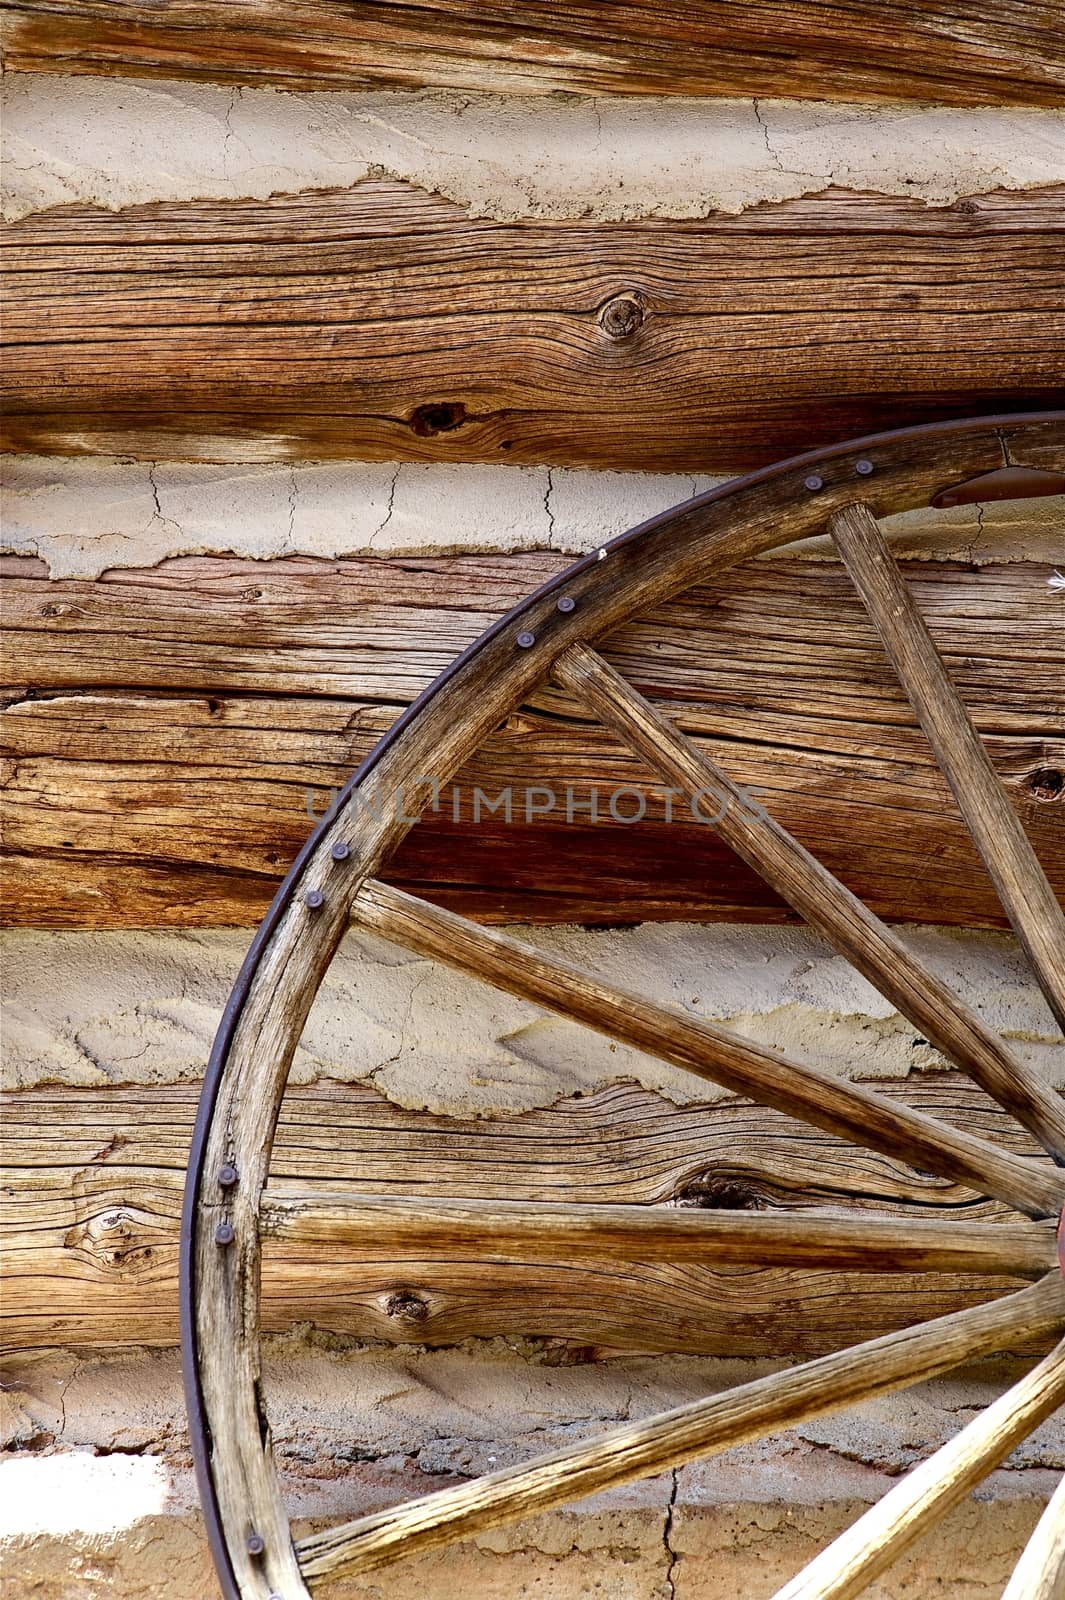 Horizontal Logs Wall and Old Vintage Wood Wheel. Vertical Photography